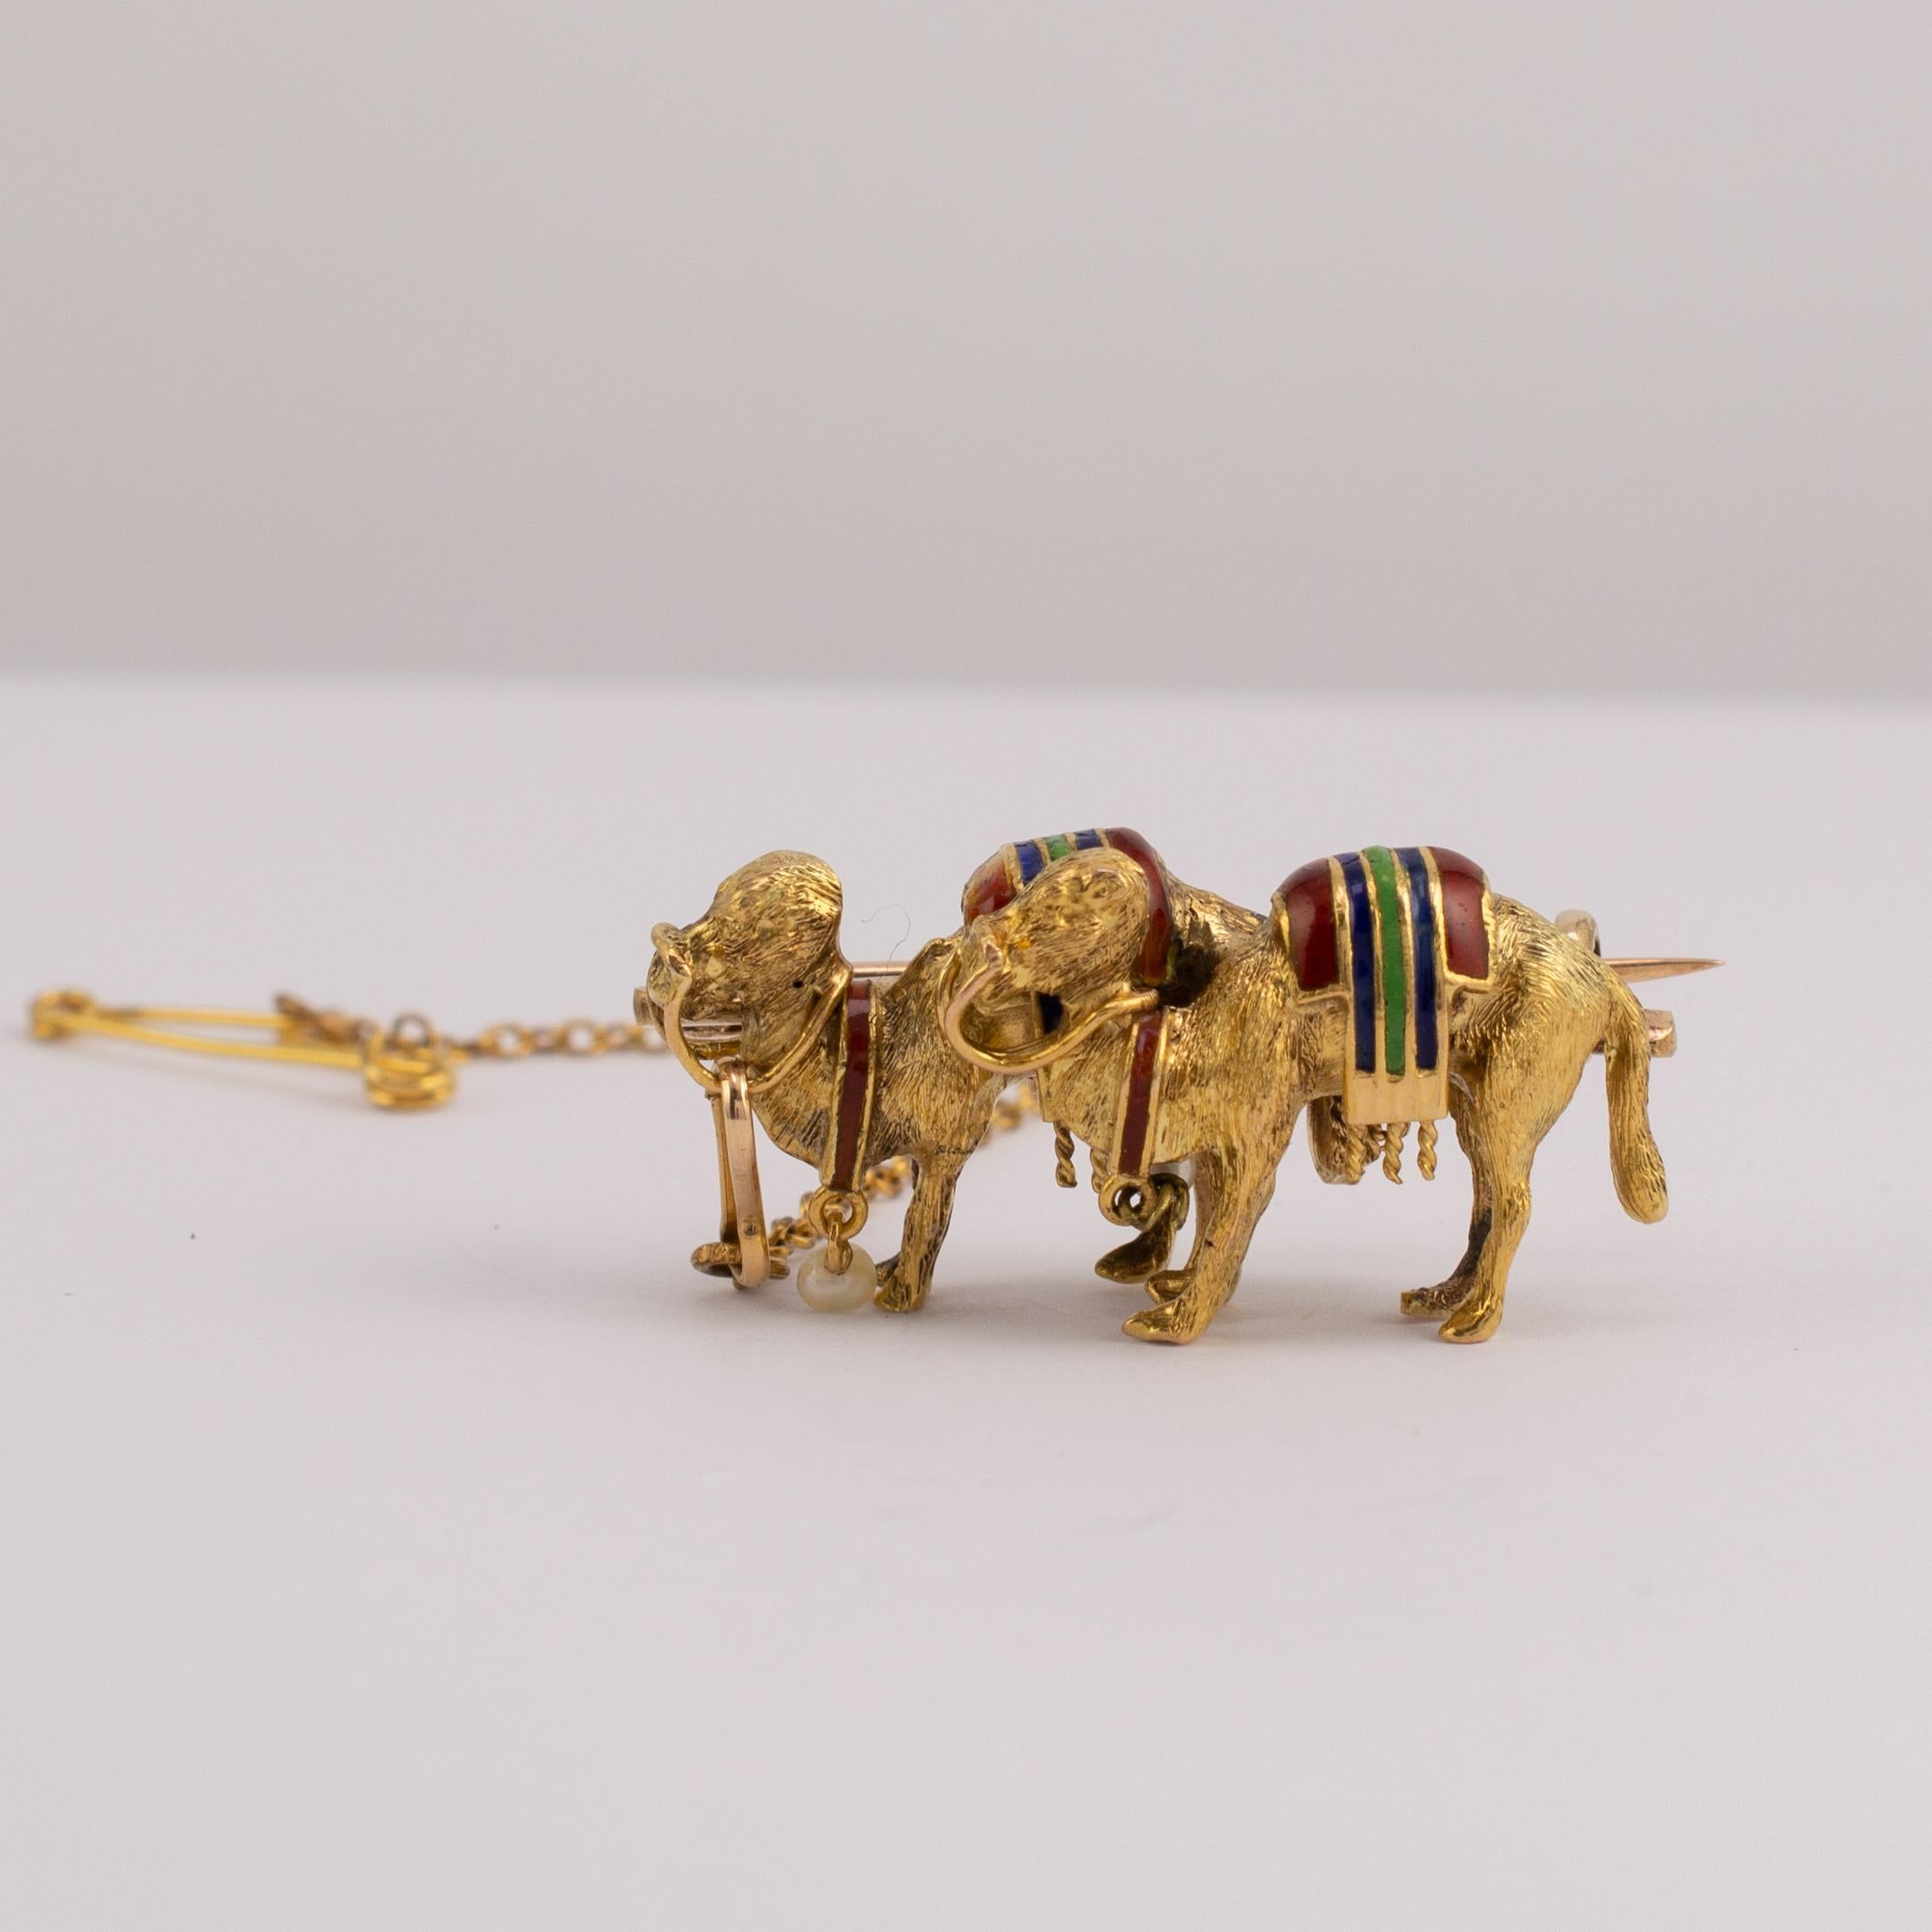  18 Karat Gold Camel Brooch With Enamel Pearl, circa 1940s For Sale 3